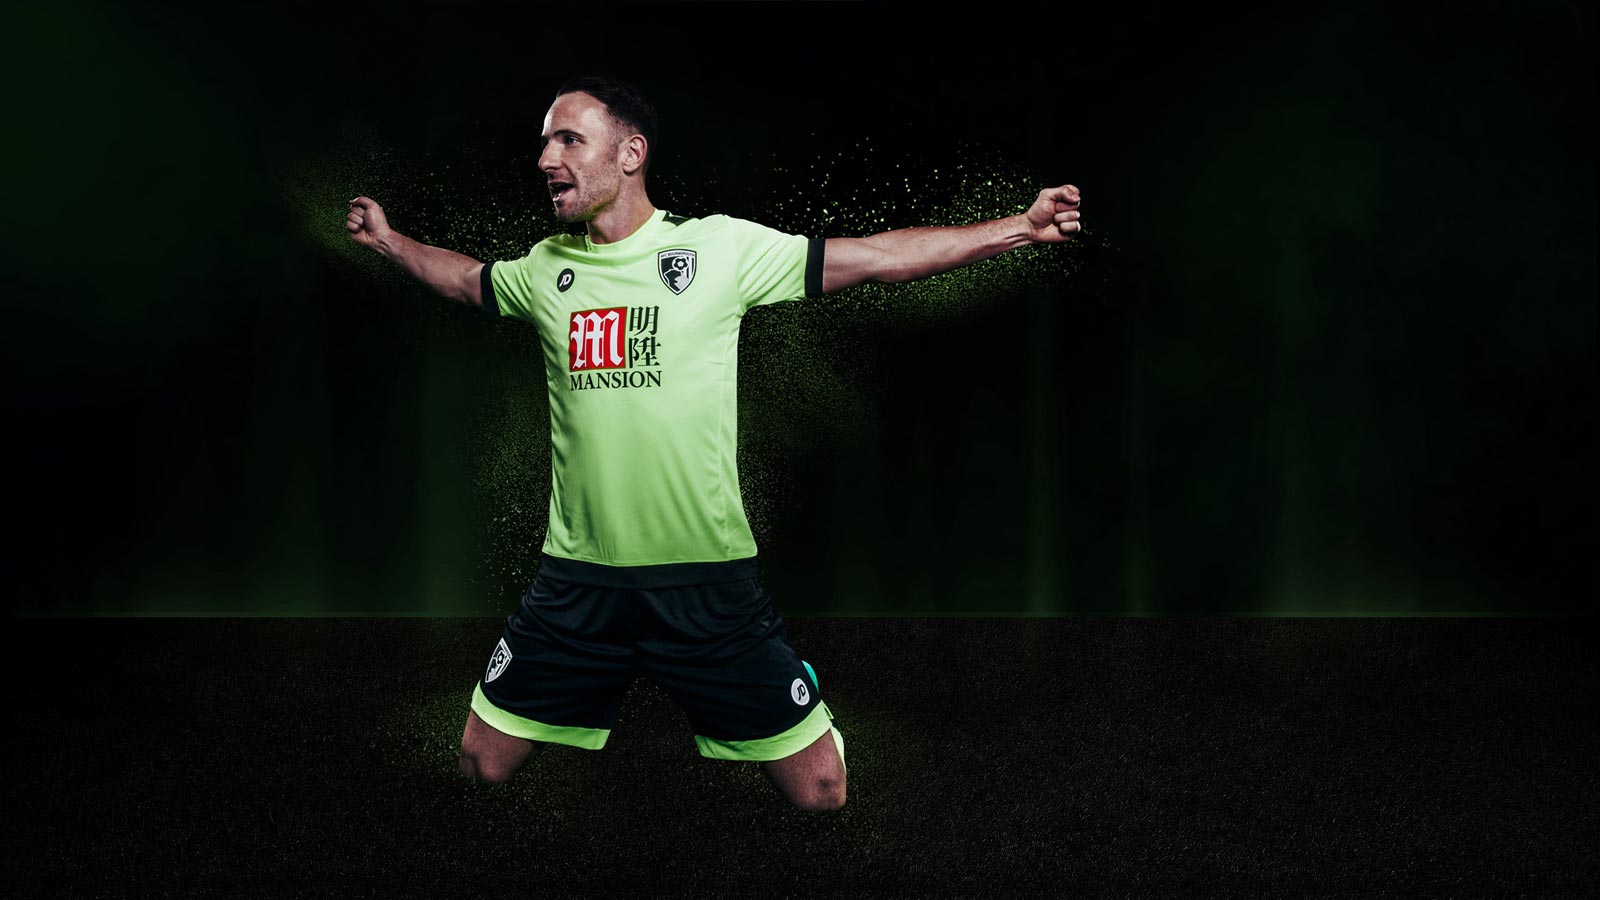 BLACK GREEN UMBRO S/S SOCCER FOOTBALL SHIRT L Details about   AFC BOURNEMOUTH 2017/18 3RD KIT 